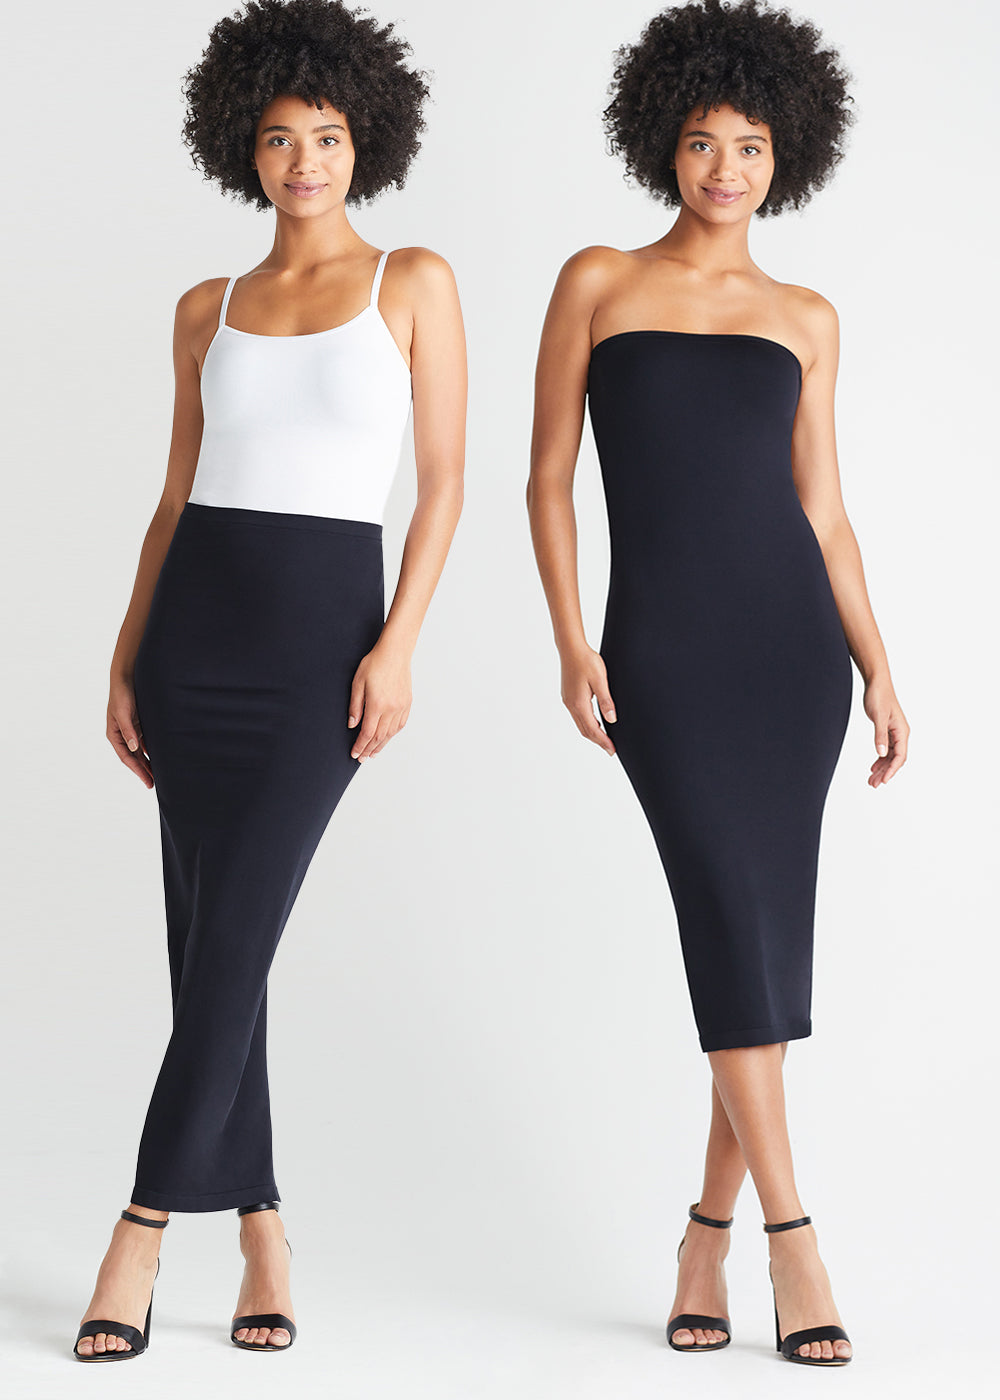 strapless convertible smoothing tube dress and skirt in Black worn as a skirt and convertible shaping camisole - outlast® seamless in White also worn as a dress worn by a woman standing facing forward with arms at sides Yummie